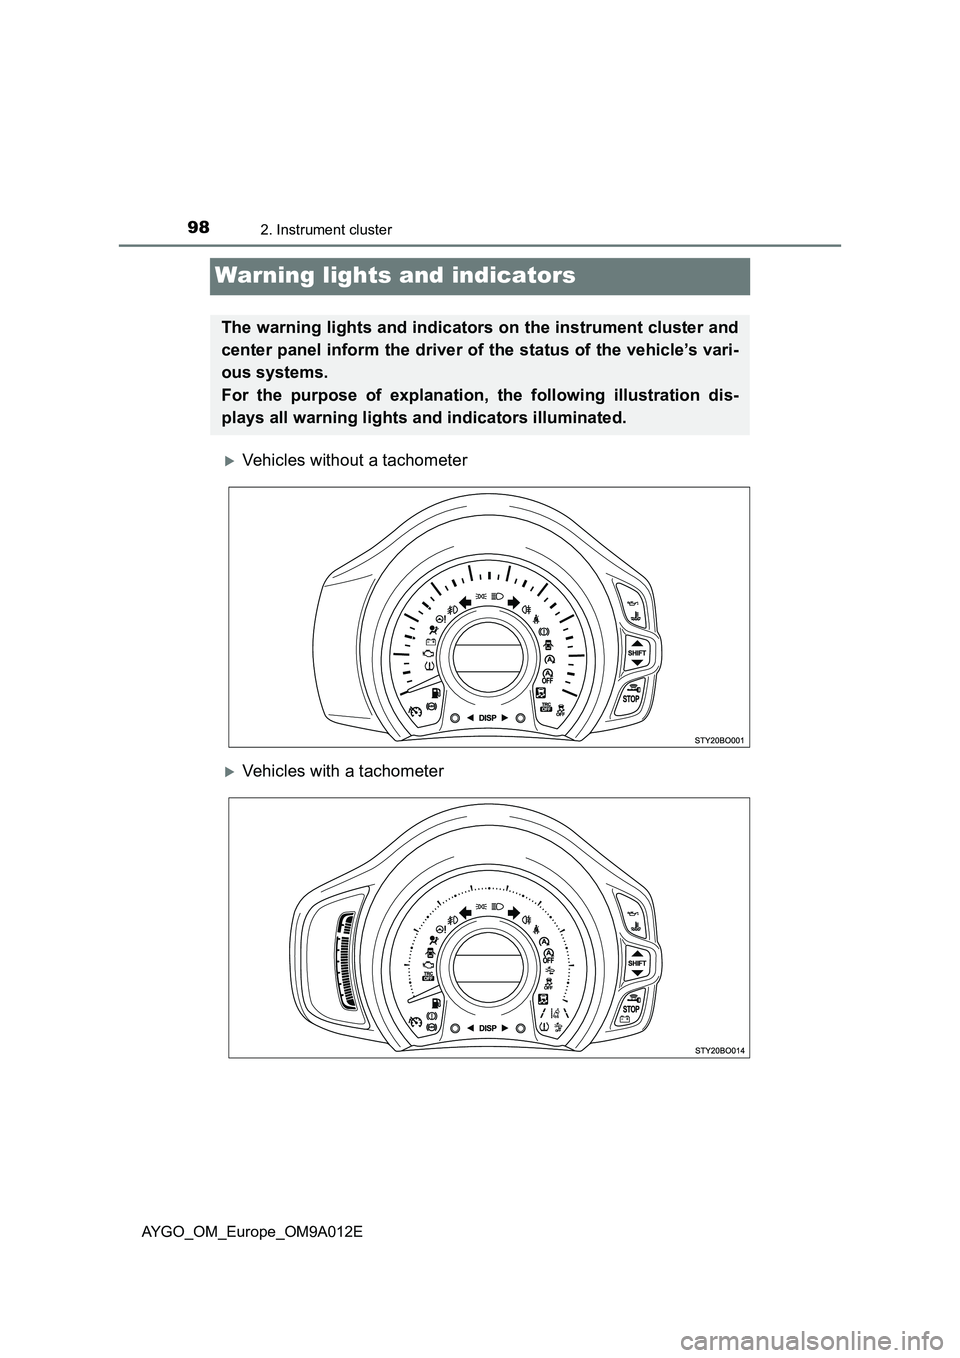 TOYOTA AYGO 2021  Owners Manual 982. Instrument cluster
AYGO_OM_Europe_OM9A012E
Warning lights and indicators
Vehicles without a tachometer
Vehicles with a tachometer
The warning lights and indicators on the instrument cluster